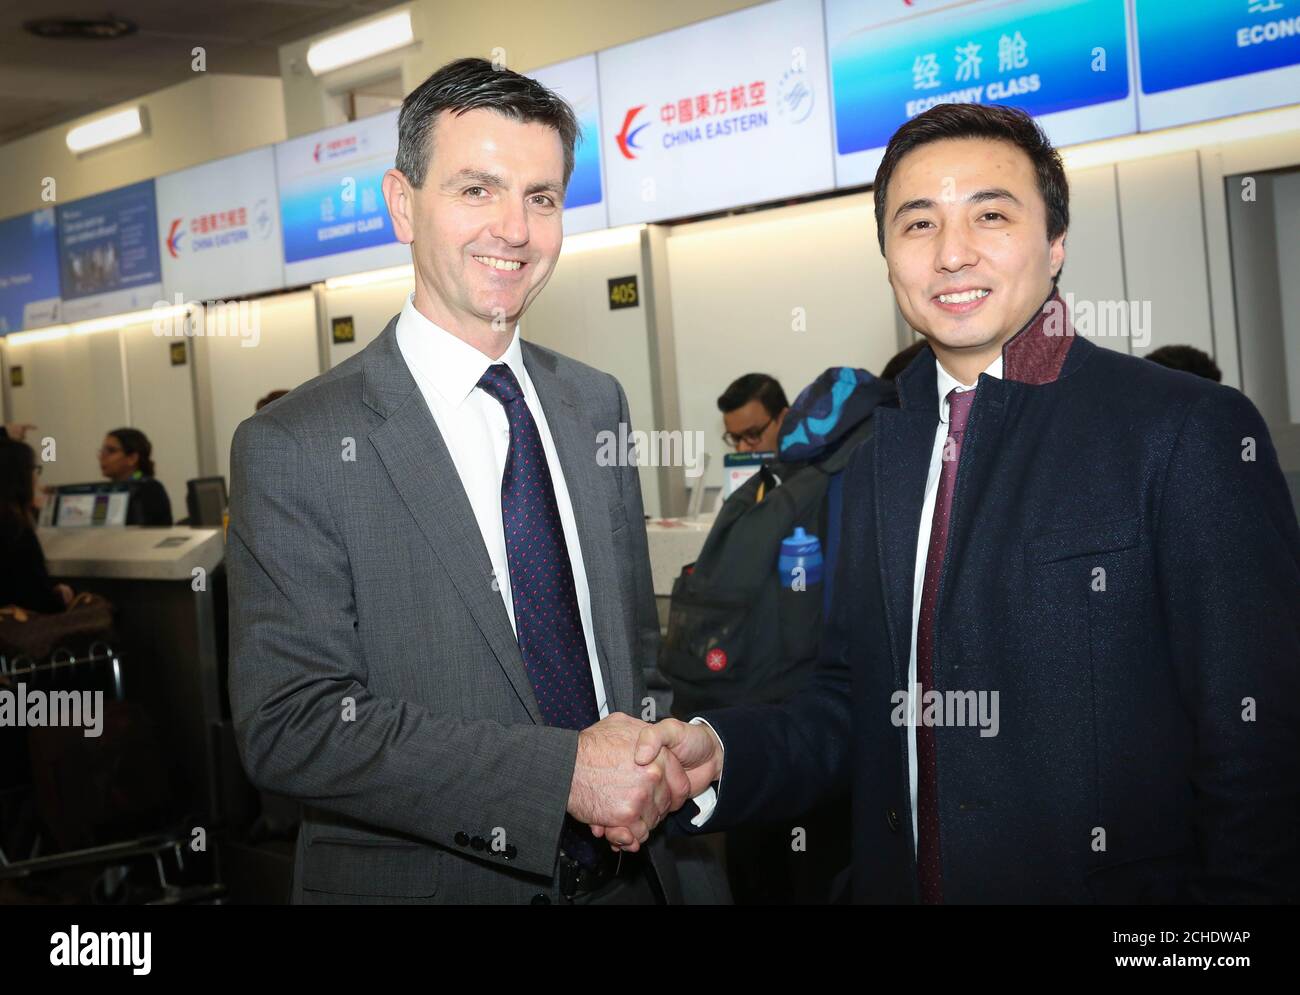 EDITORIAL USE ONLY Guy Stephenson, London Gatwick's Chief Commercial Officer, meets Kevin Li, General Manager UK &amp; Ireland at China Eastern, as the airline celebrates the launch of a vital new route from Gatwick to Shanghai.  Stock Photo